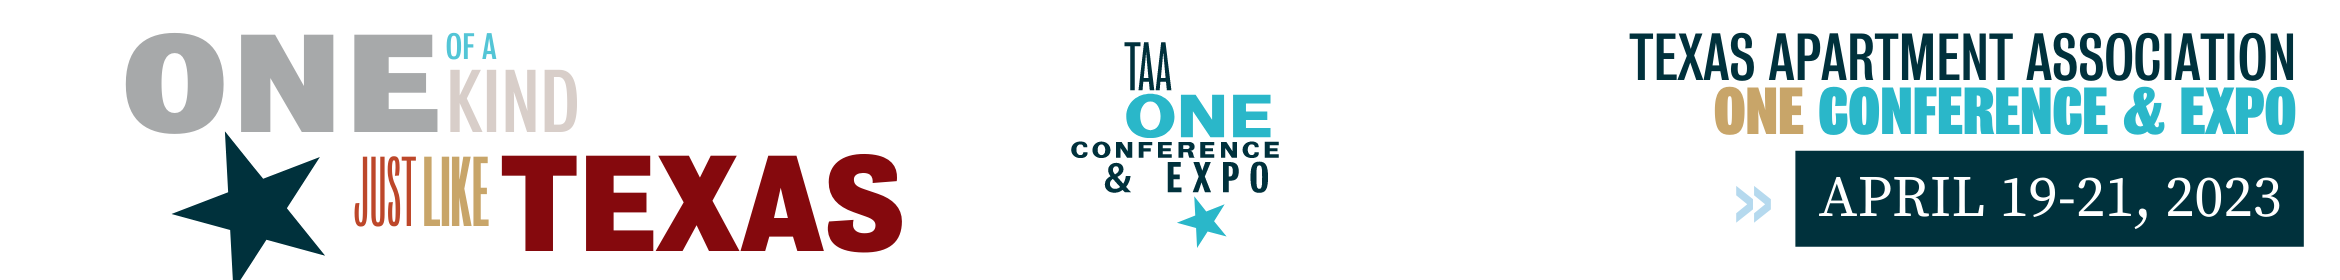 2023 TAA ONE Conference & Expo Main banner